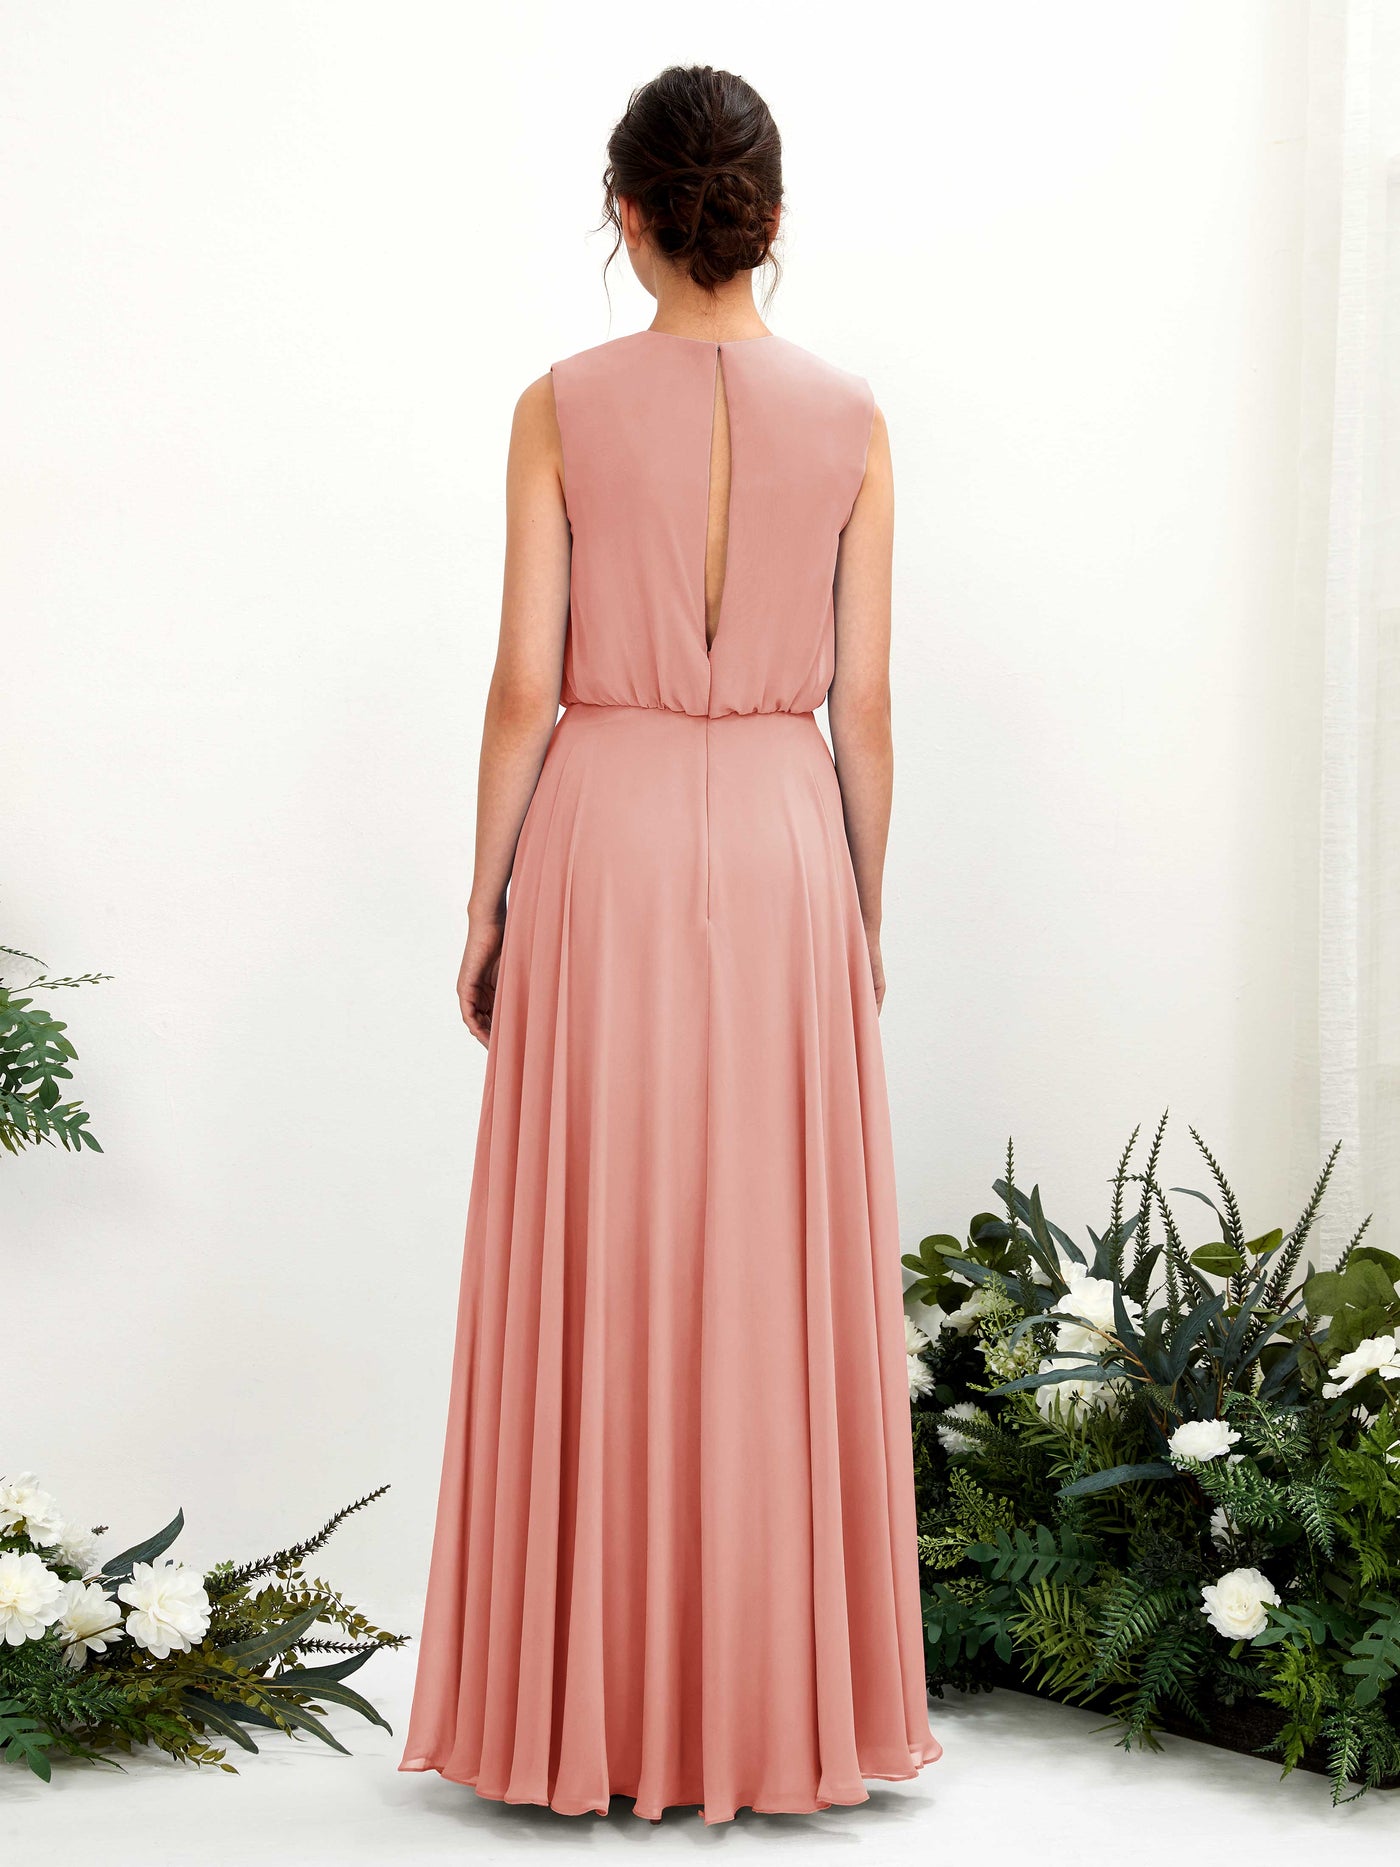 Champagne Rose Bridesmaid Dresses Bridesmaid Dress A-line Chiffon Round Full Length Sleeveless Wedding Party Dress (81222806)#color_champagne-rose